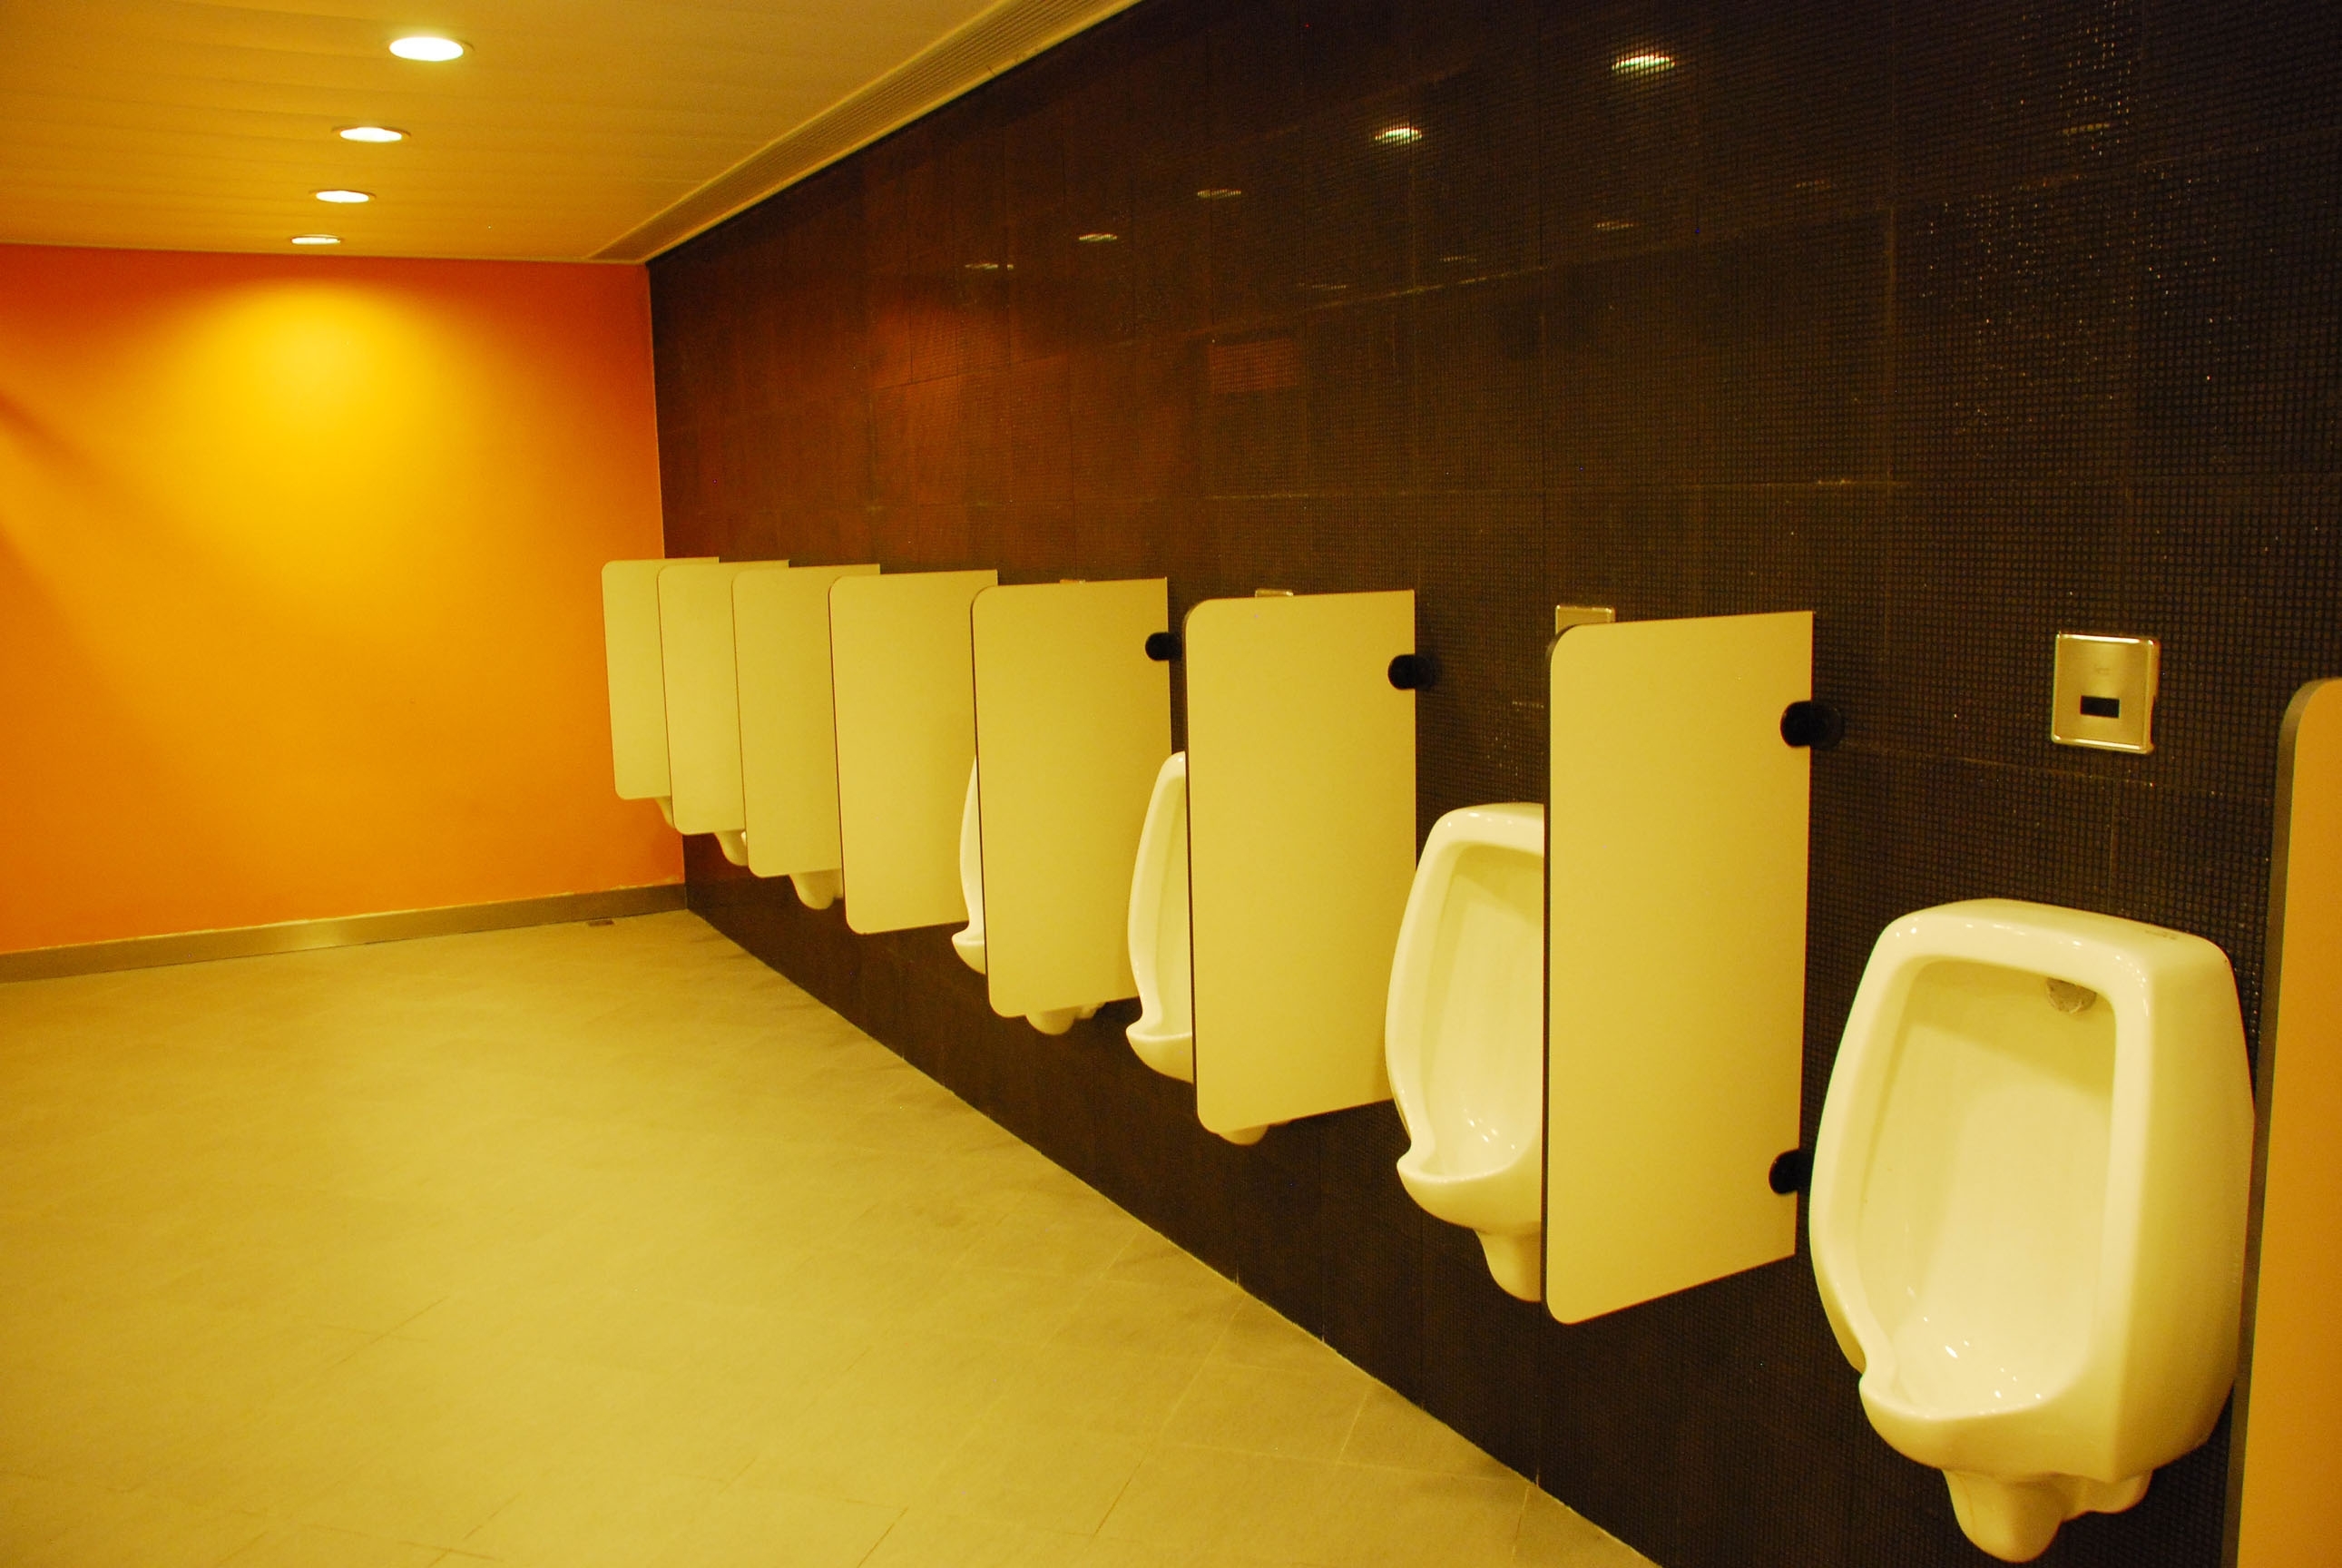 Hpl Urinal Partition - Straight